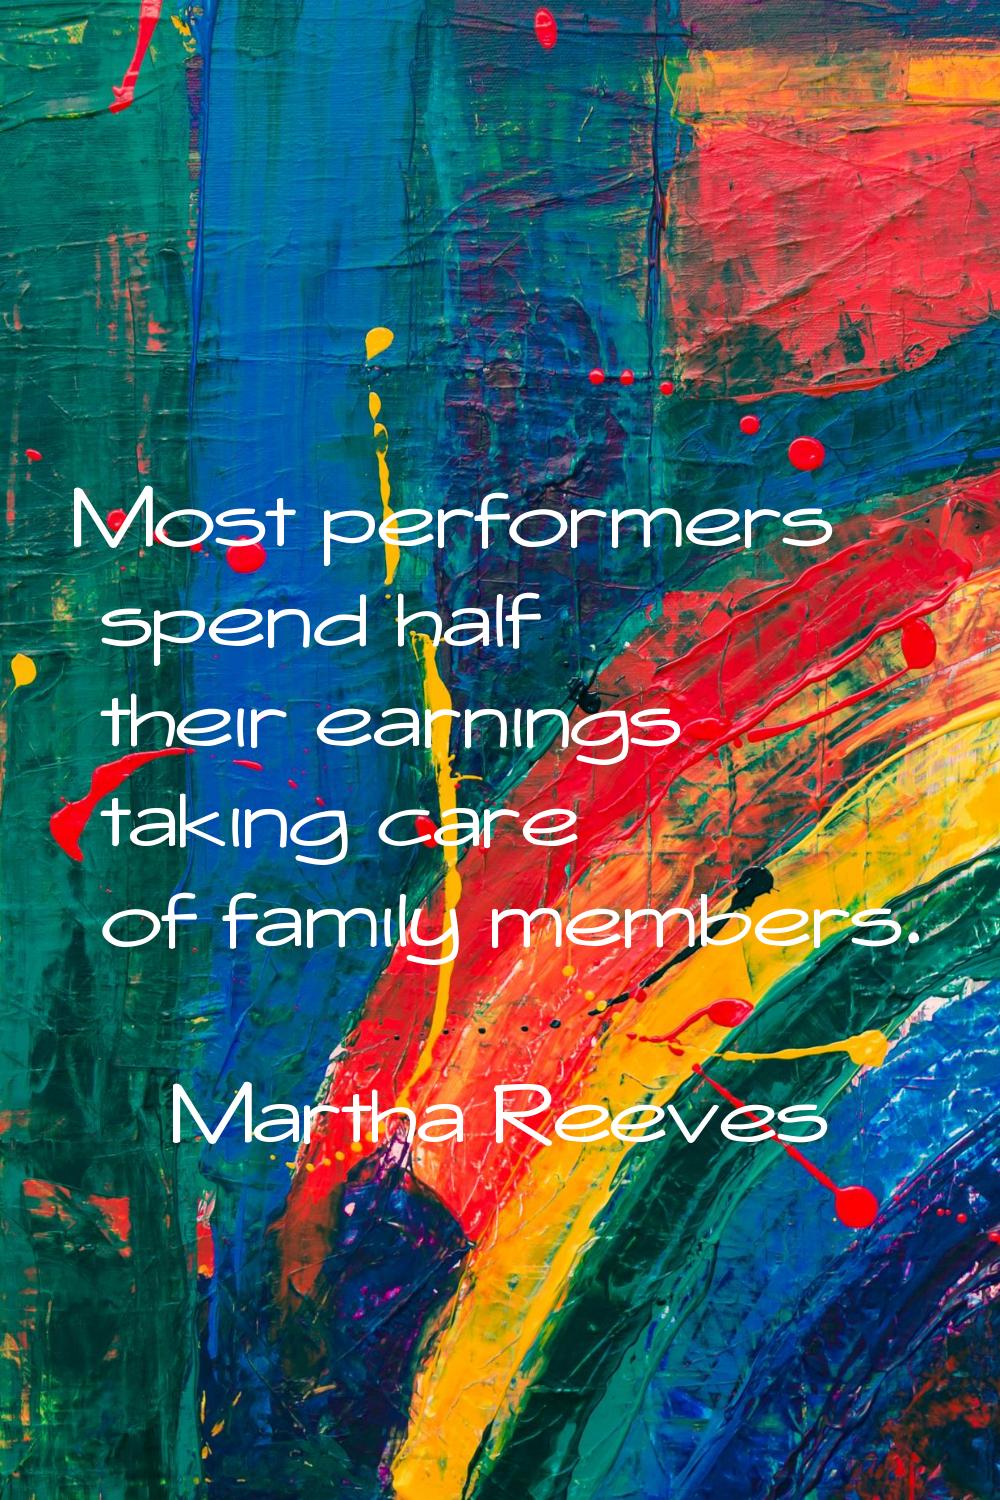 Most performers spend half their earnings taking care of family members.